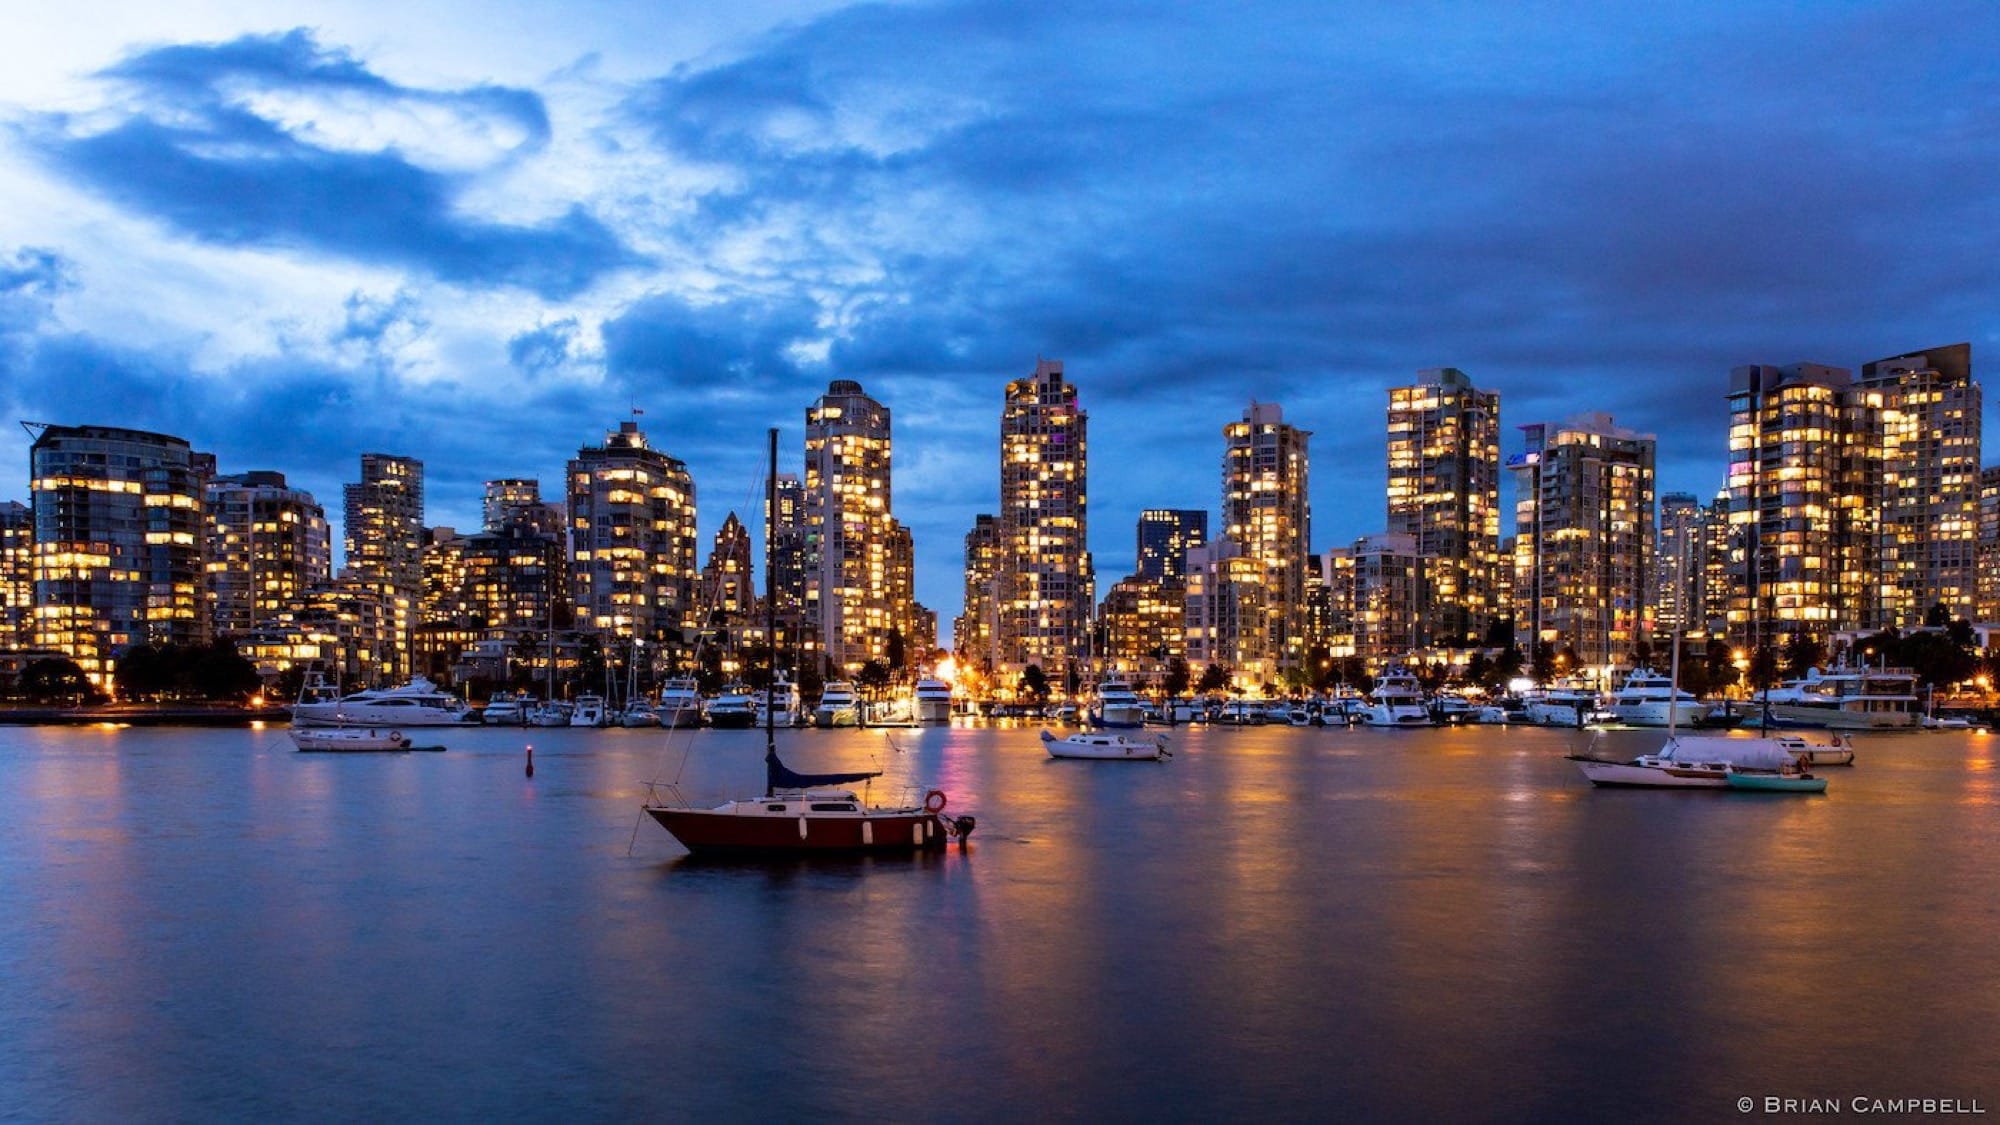 Vancouver skyline in the evening, boats in the foreground